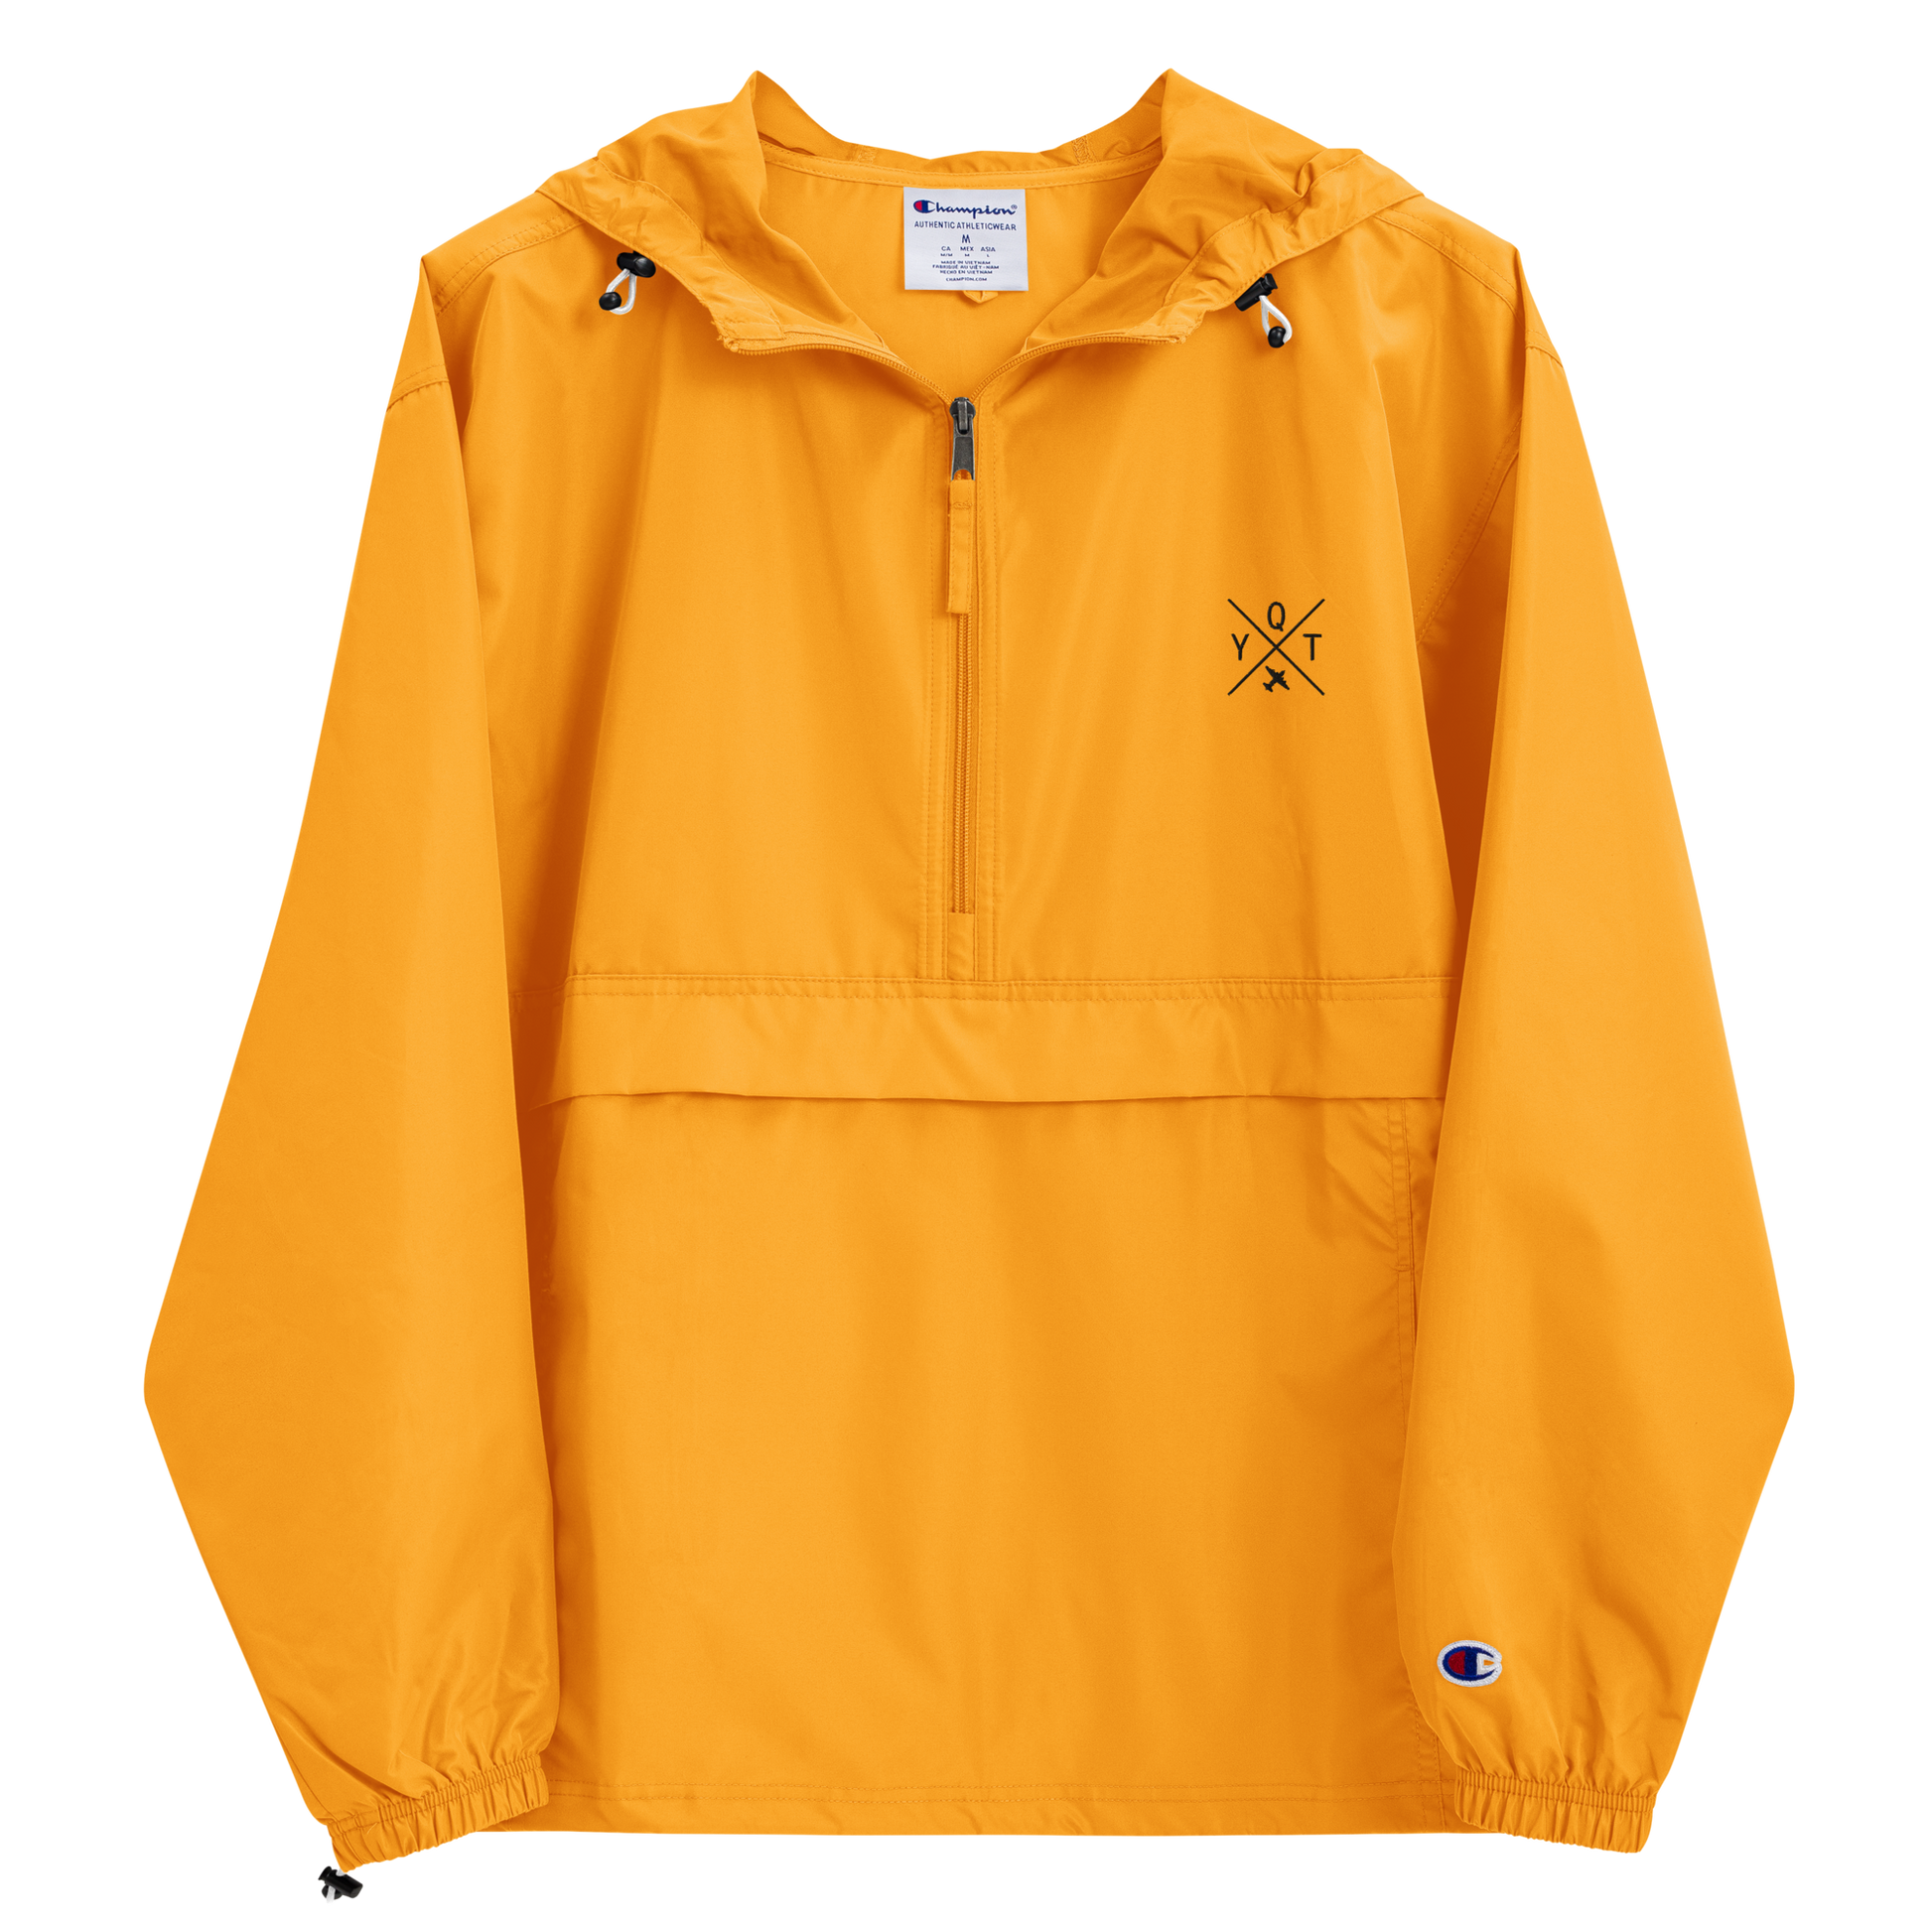 Crossed-X Packable Jacket • YQT Thunder Bay • YHM Designs - Image 07